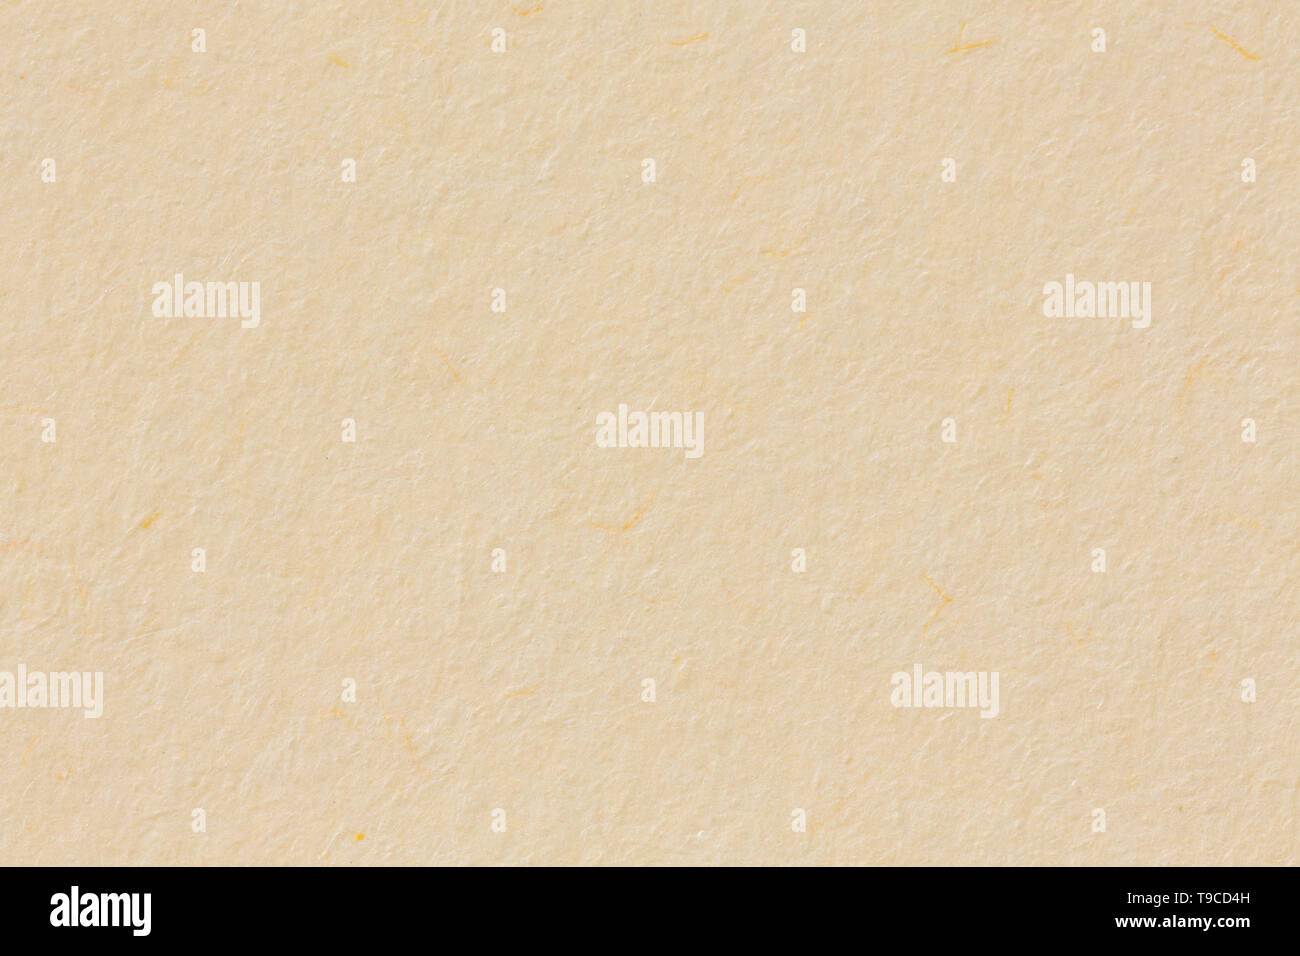 Light beige paper texture, great as a background. Stock Photo